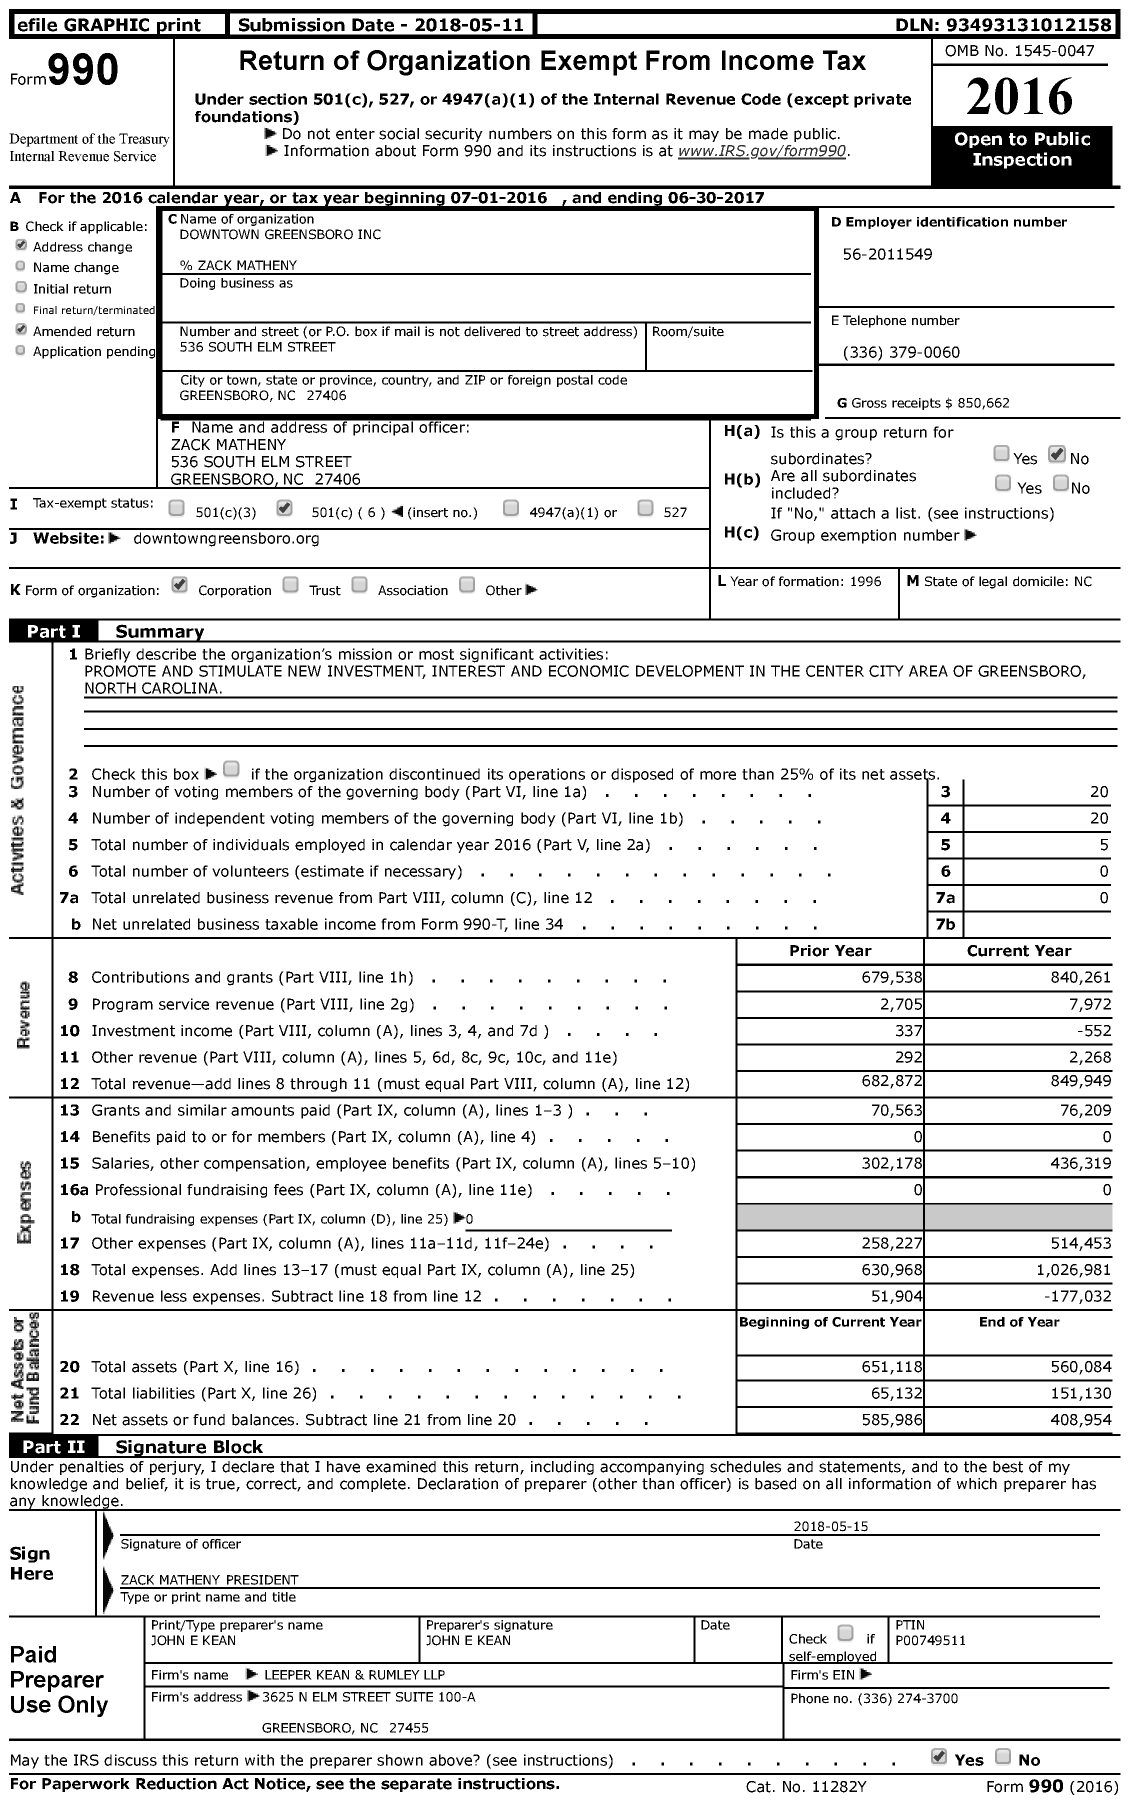 Image of first page of 2016 Form 990 for Downtown Greensboro (DGI)